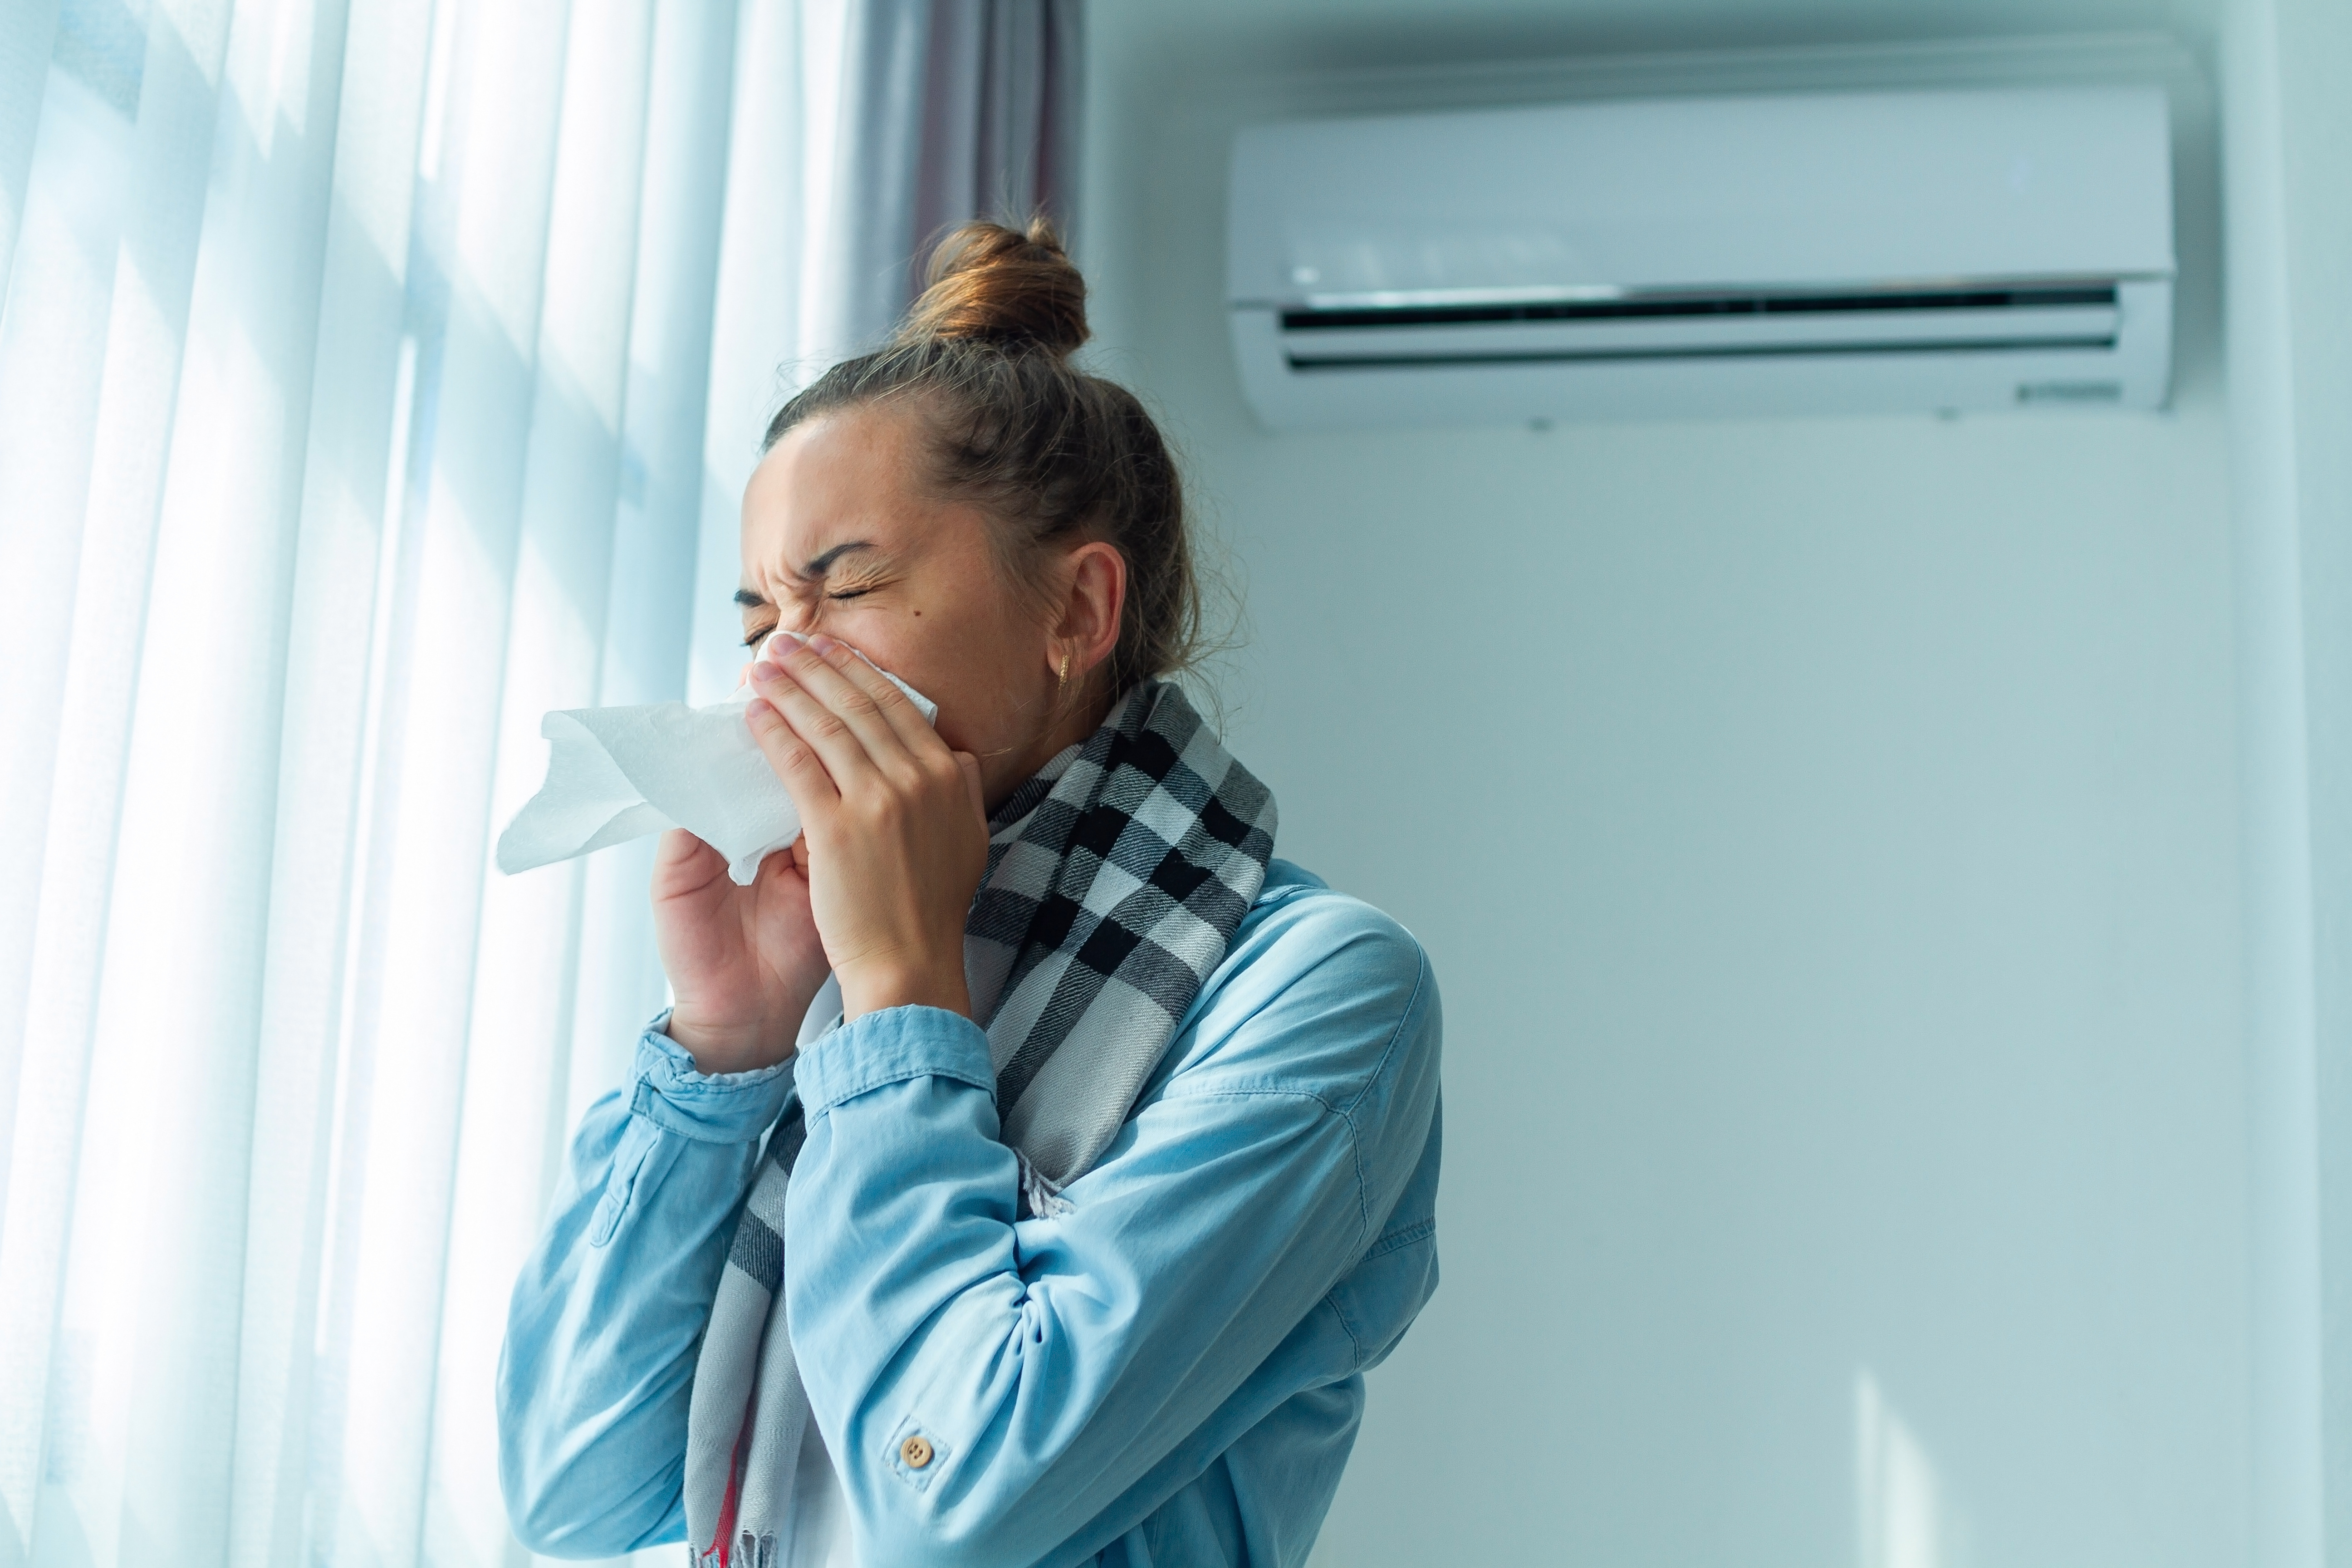 Sneezing caused by low indoor air quality